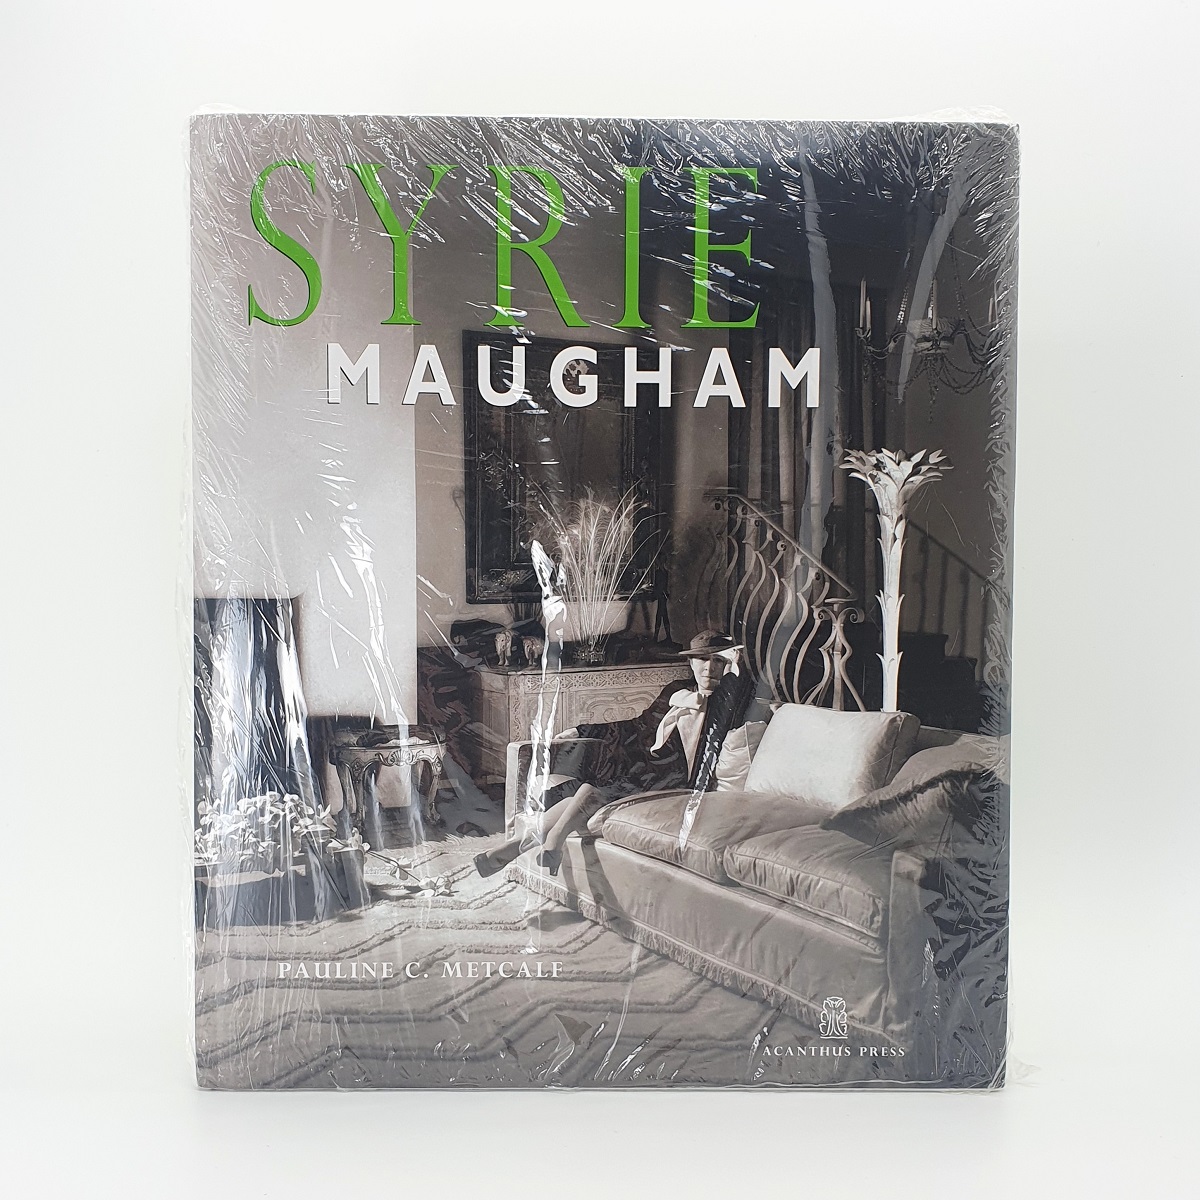 Syrie Maugham. Staging Glamorous Interiors